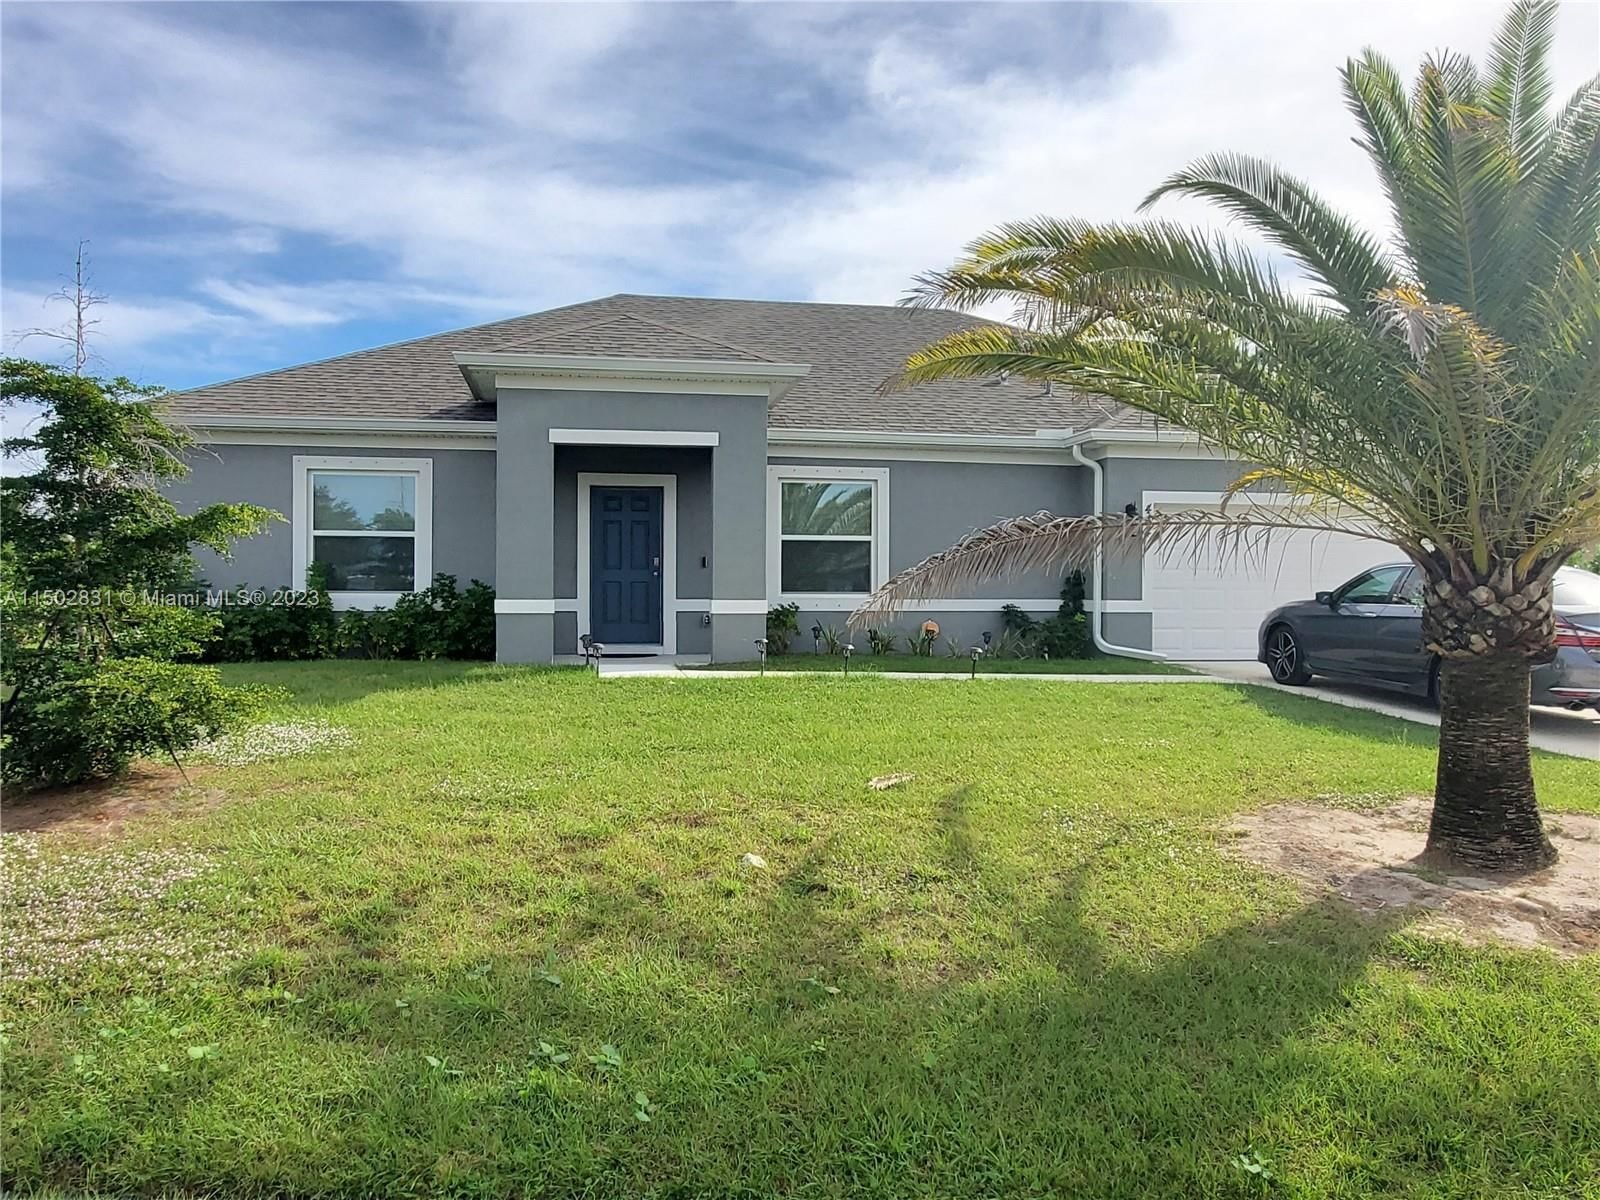 Real estate property located at 434 Hurtig Ct, St Lucie County, PORT ST LUCIE SECTION 4, Port St. Lucie, FL